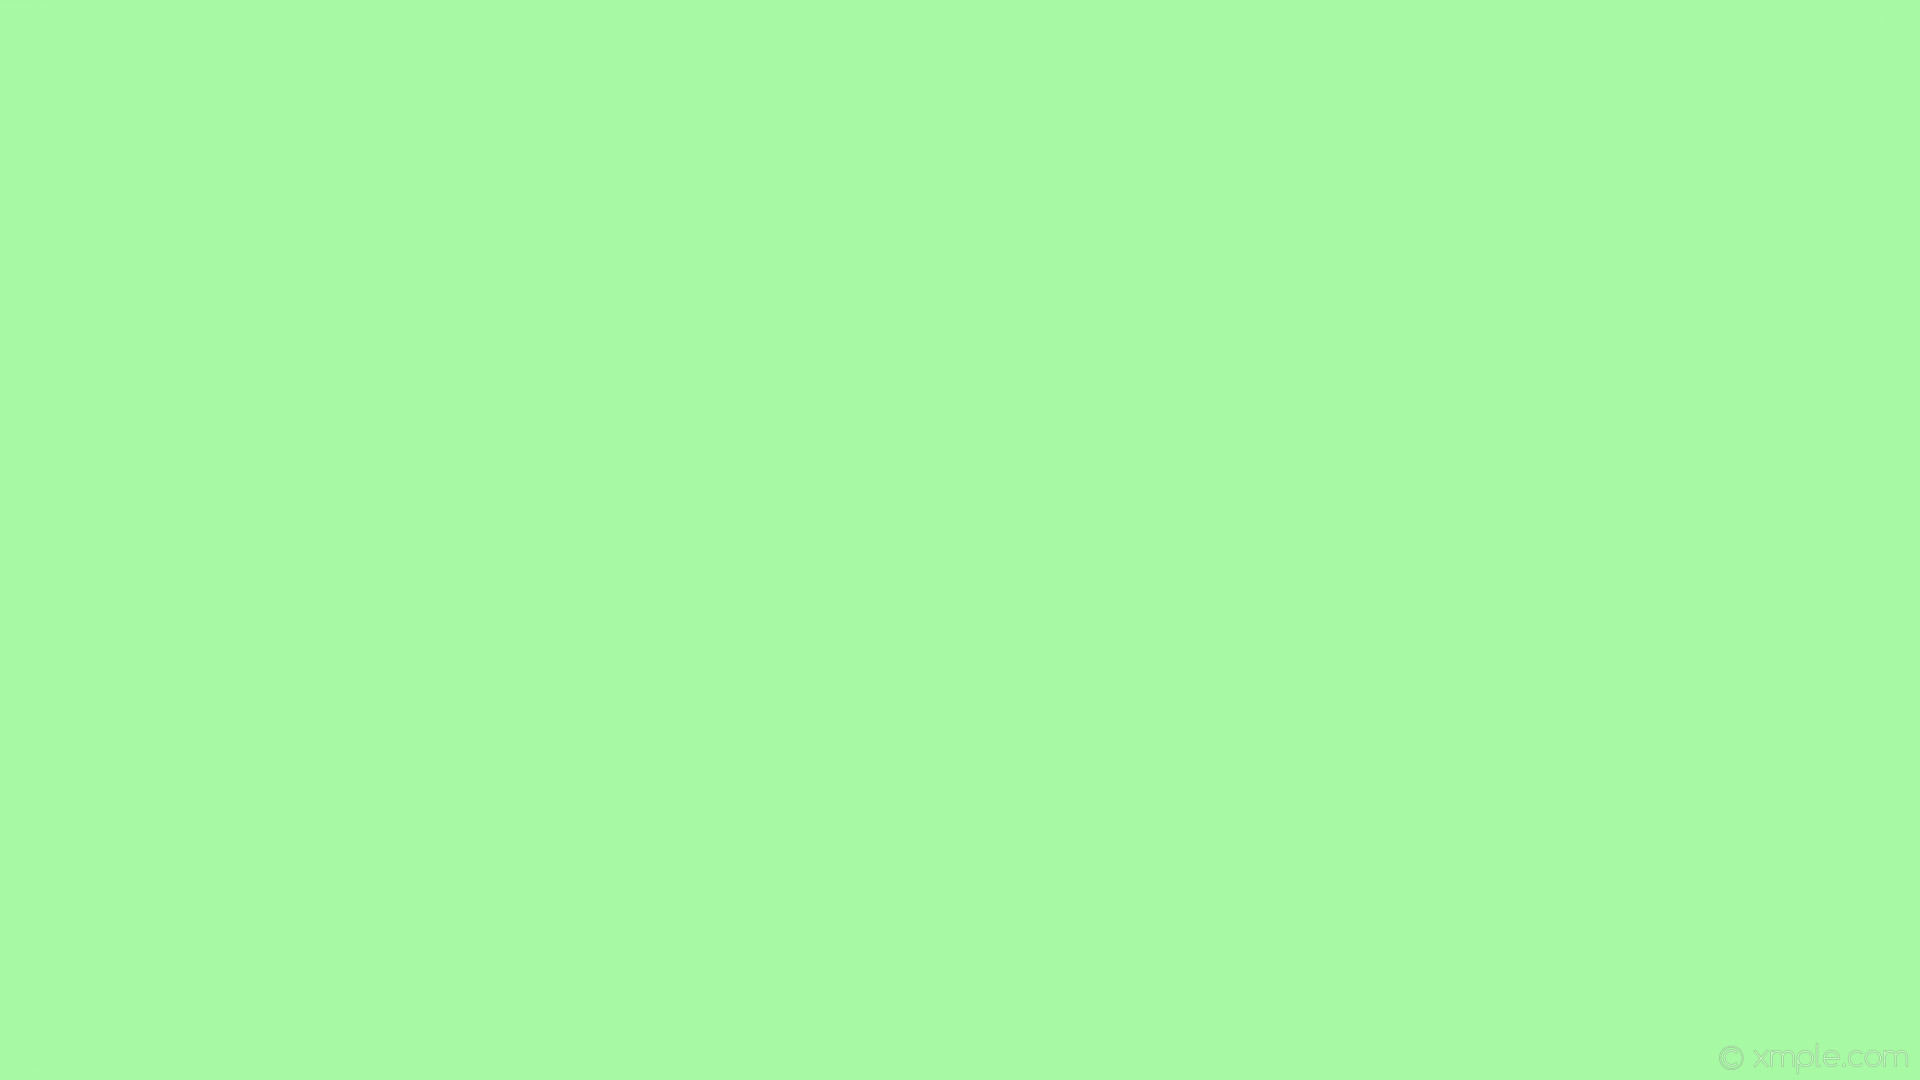 1920x1080 wallpaper plain green single one colour solid color light green #a8f9a4